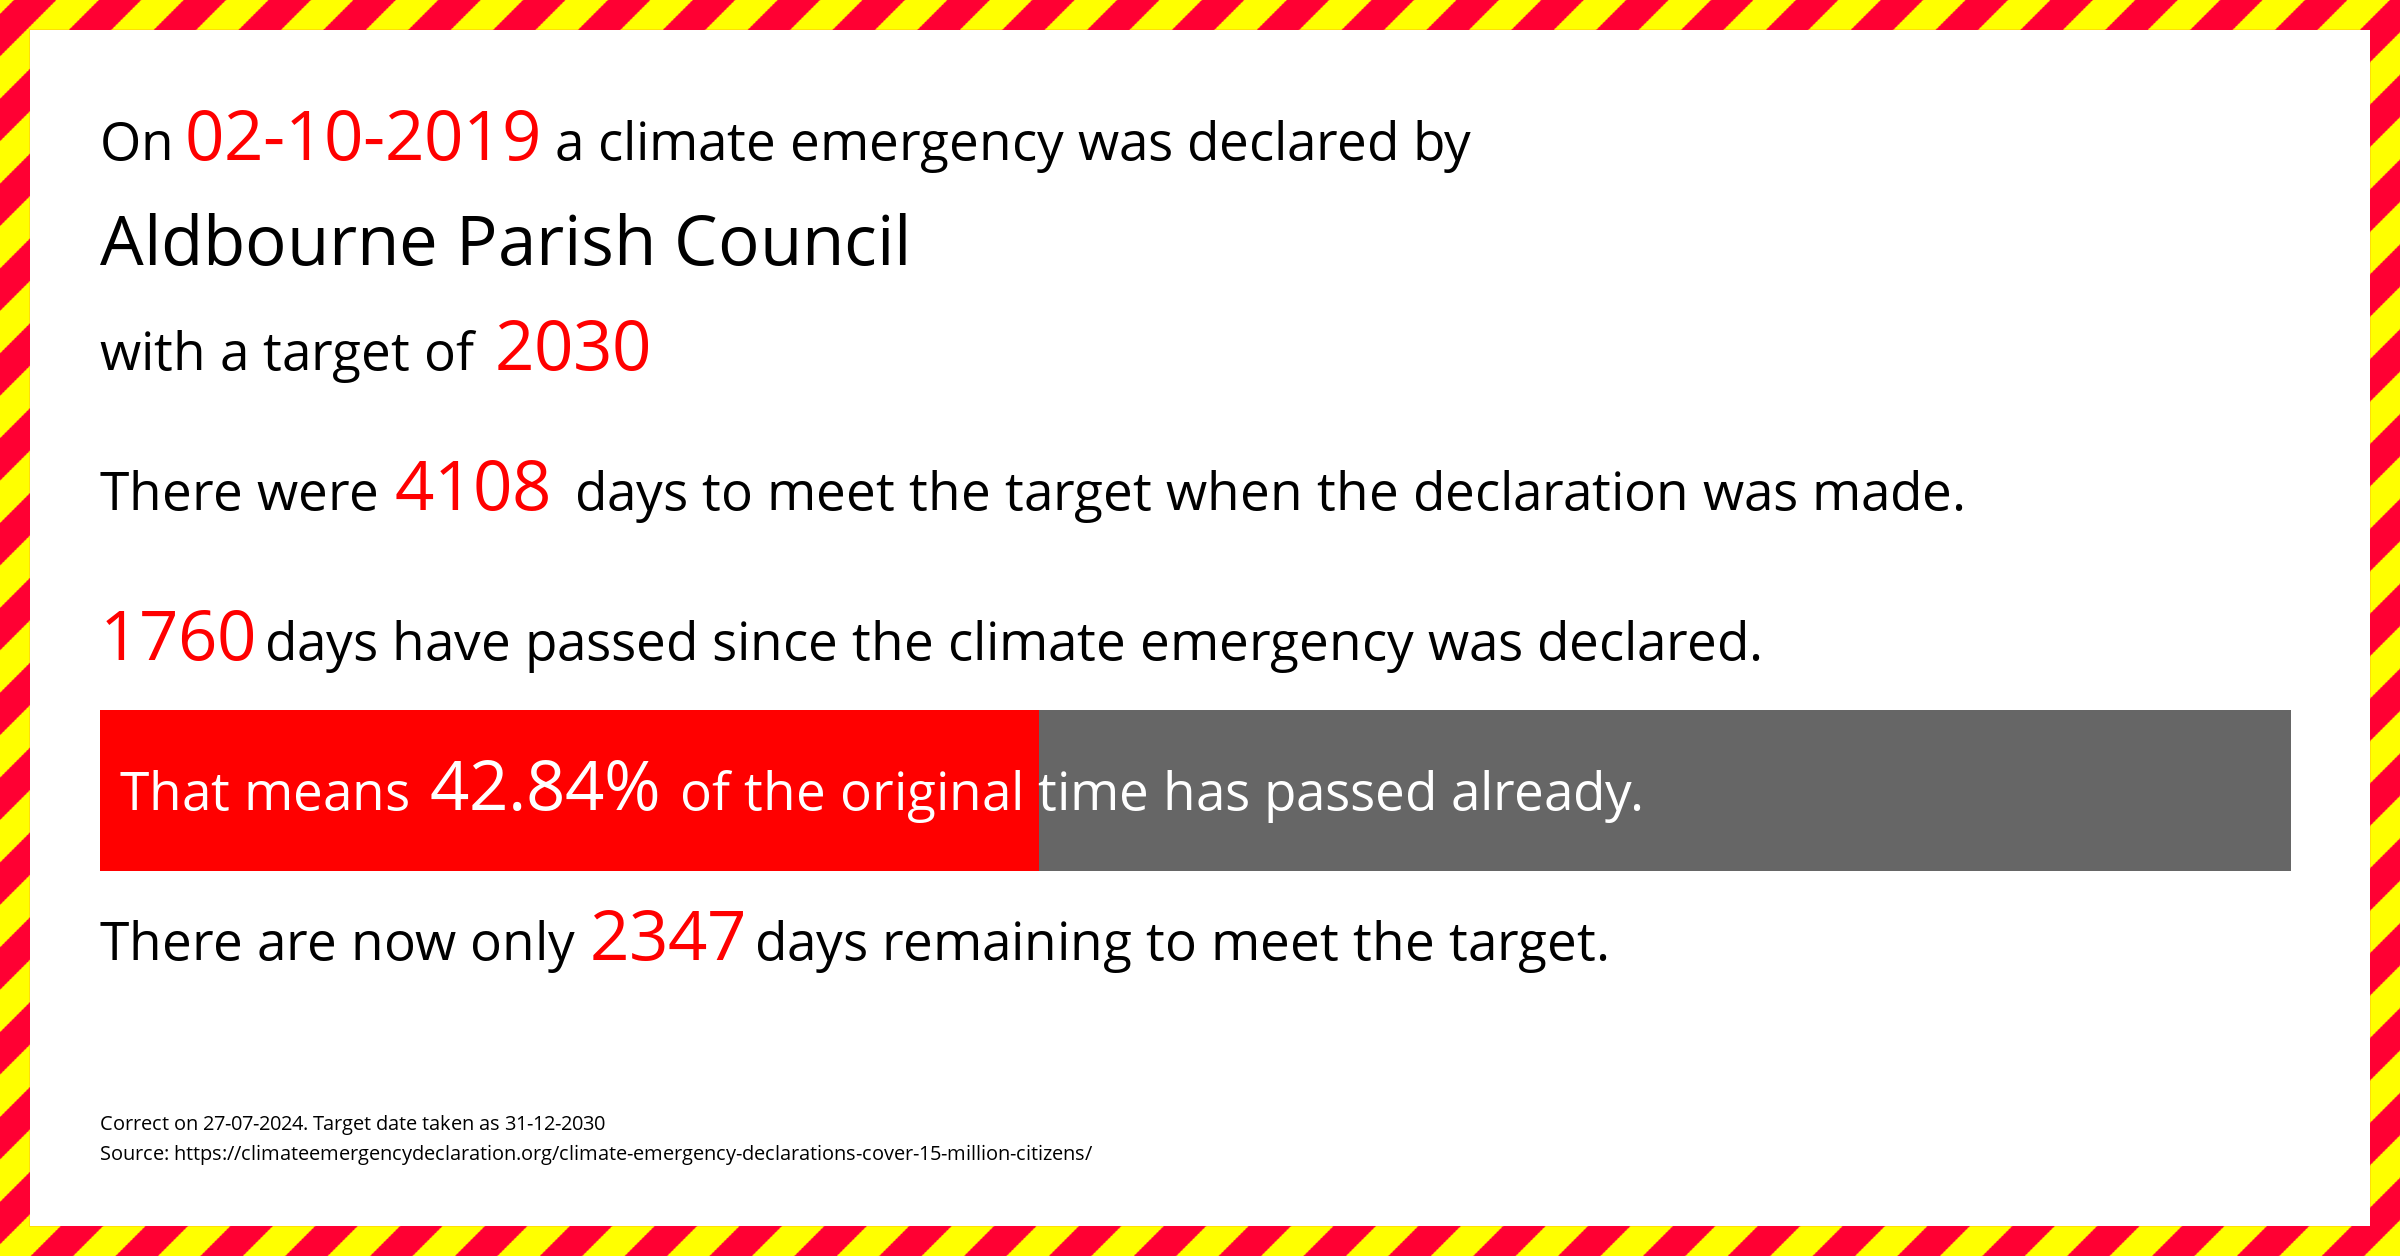 Aldbourne Parish Council declared a Climate emergency on Wednesday 2nd October 2019, with a target of 2030.